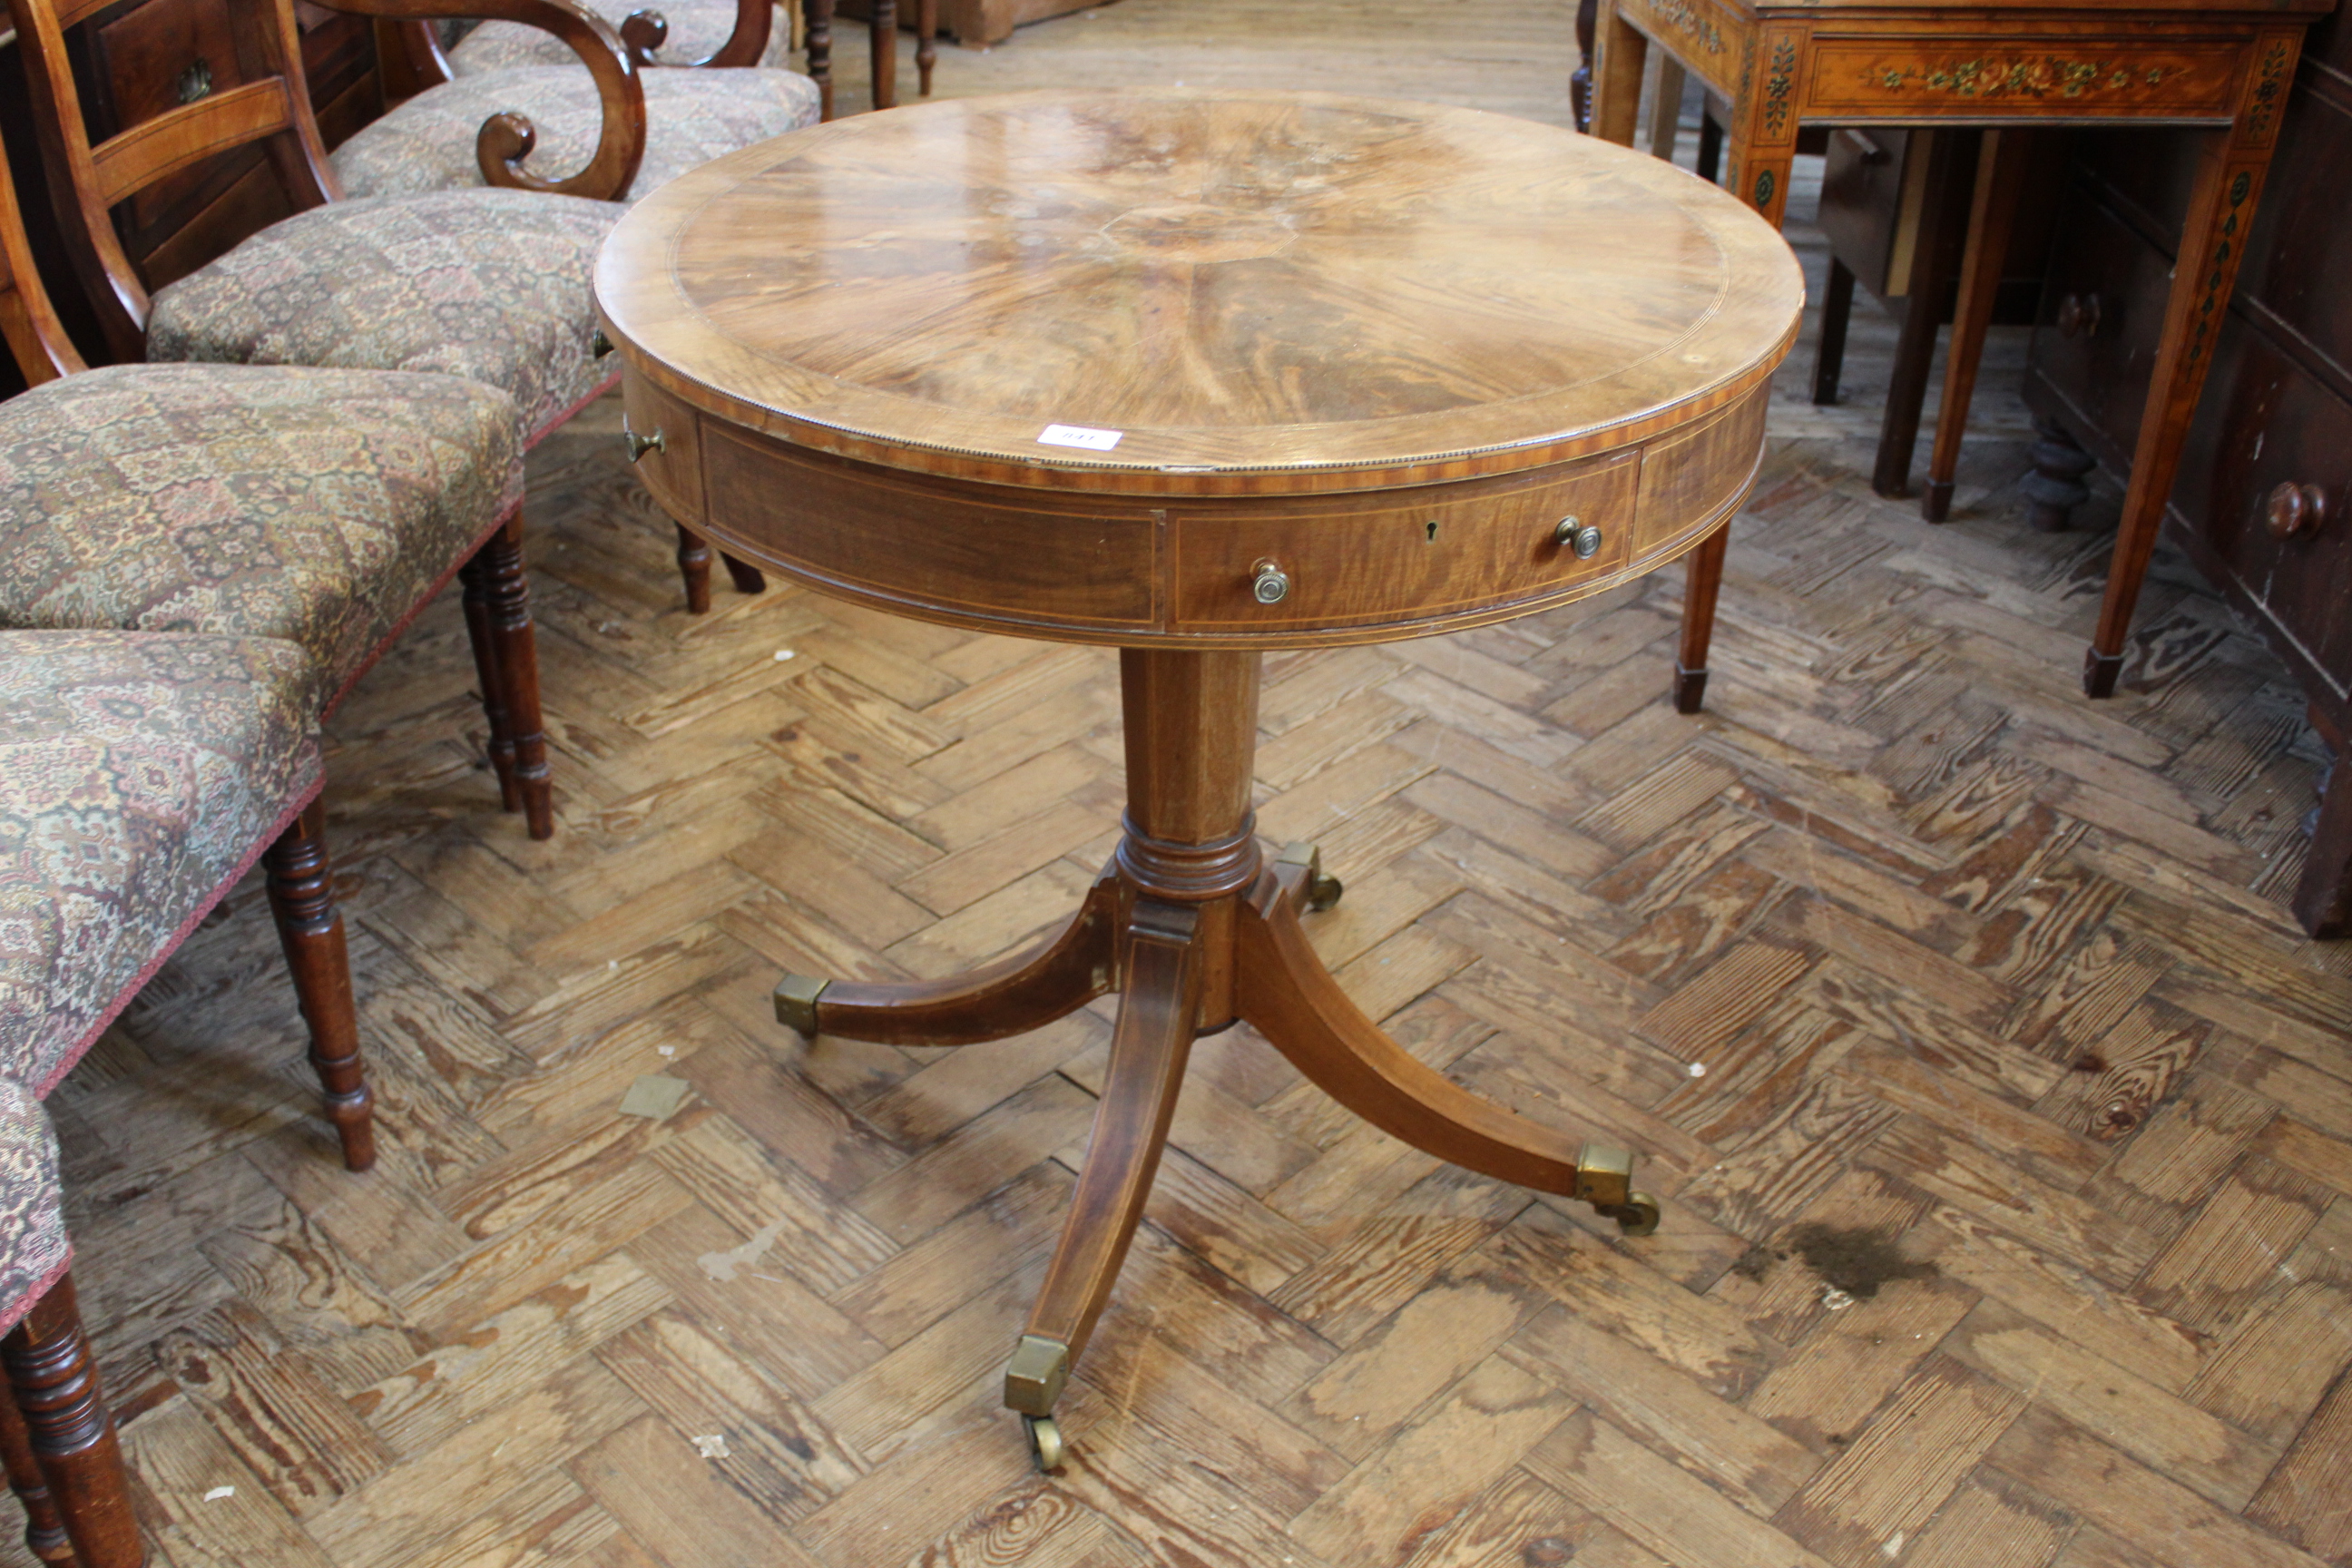 A mahogany inlaid drum table with four drawers in the Sheraton style